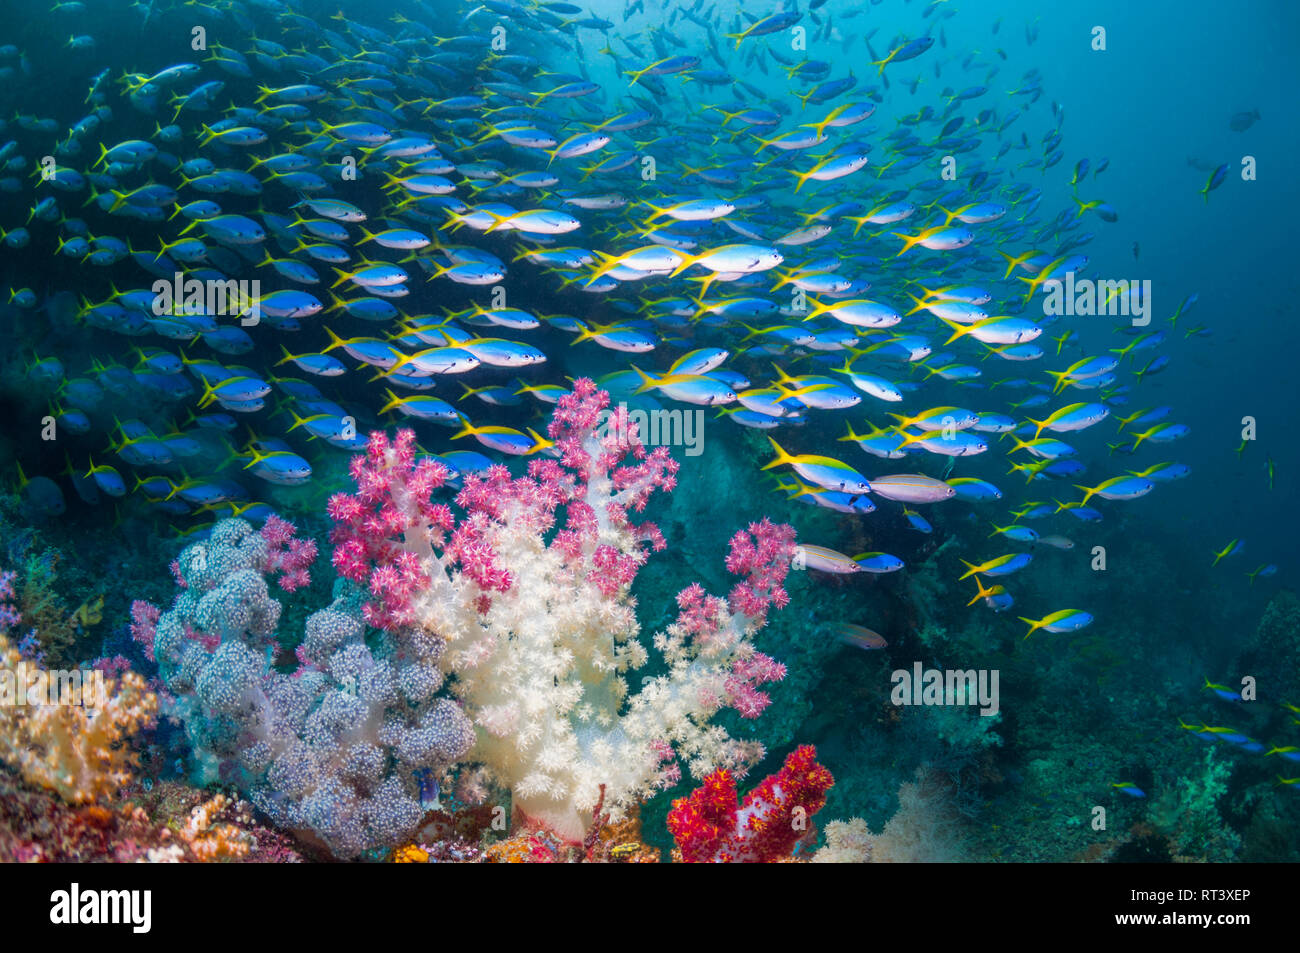 Coral reef scenery with soft corals [Dendronephthya sp.] and a school of Yellowback fusiliers [Ceasio teres].  West Papua, Indonesia. Stock Photo